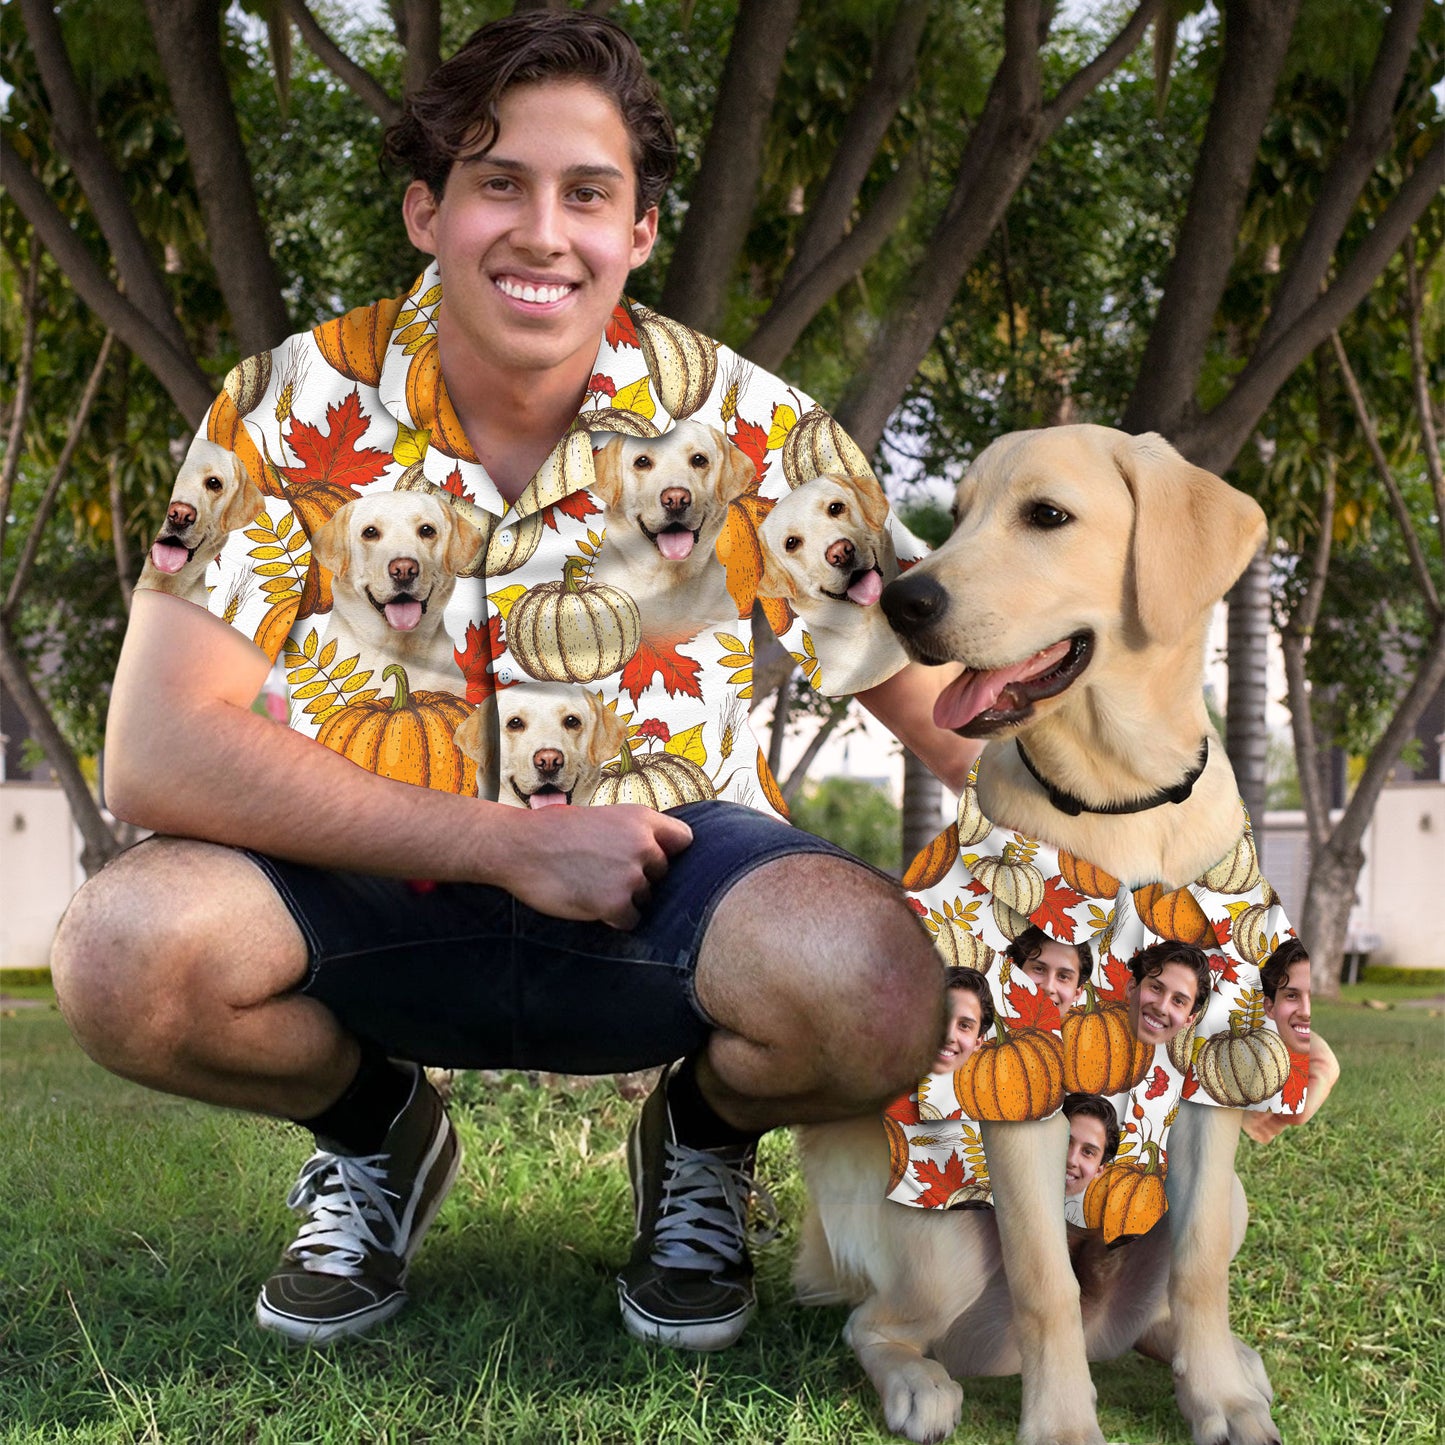 Custom Hawaiian Shirt With Pet Face | Personalized Gift For Pet Lovers | Leaves & Pumpkin Pattern White Color Aloha Shirt